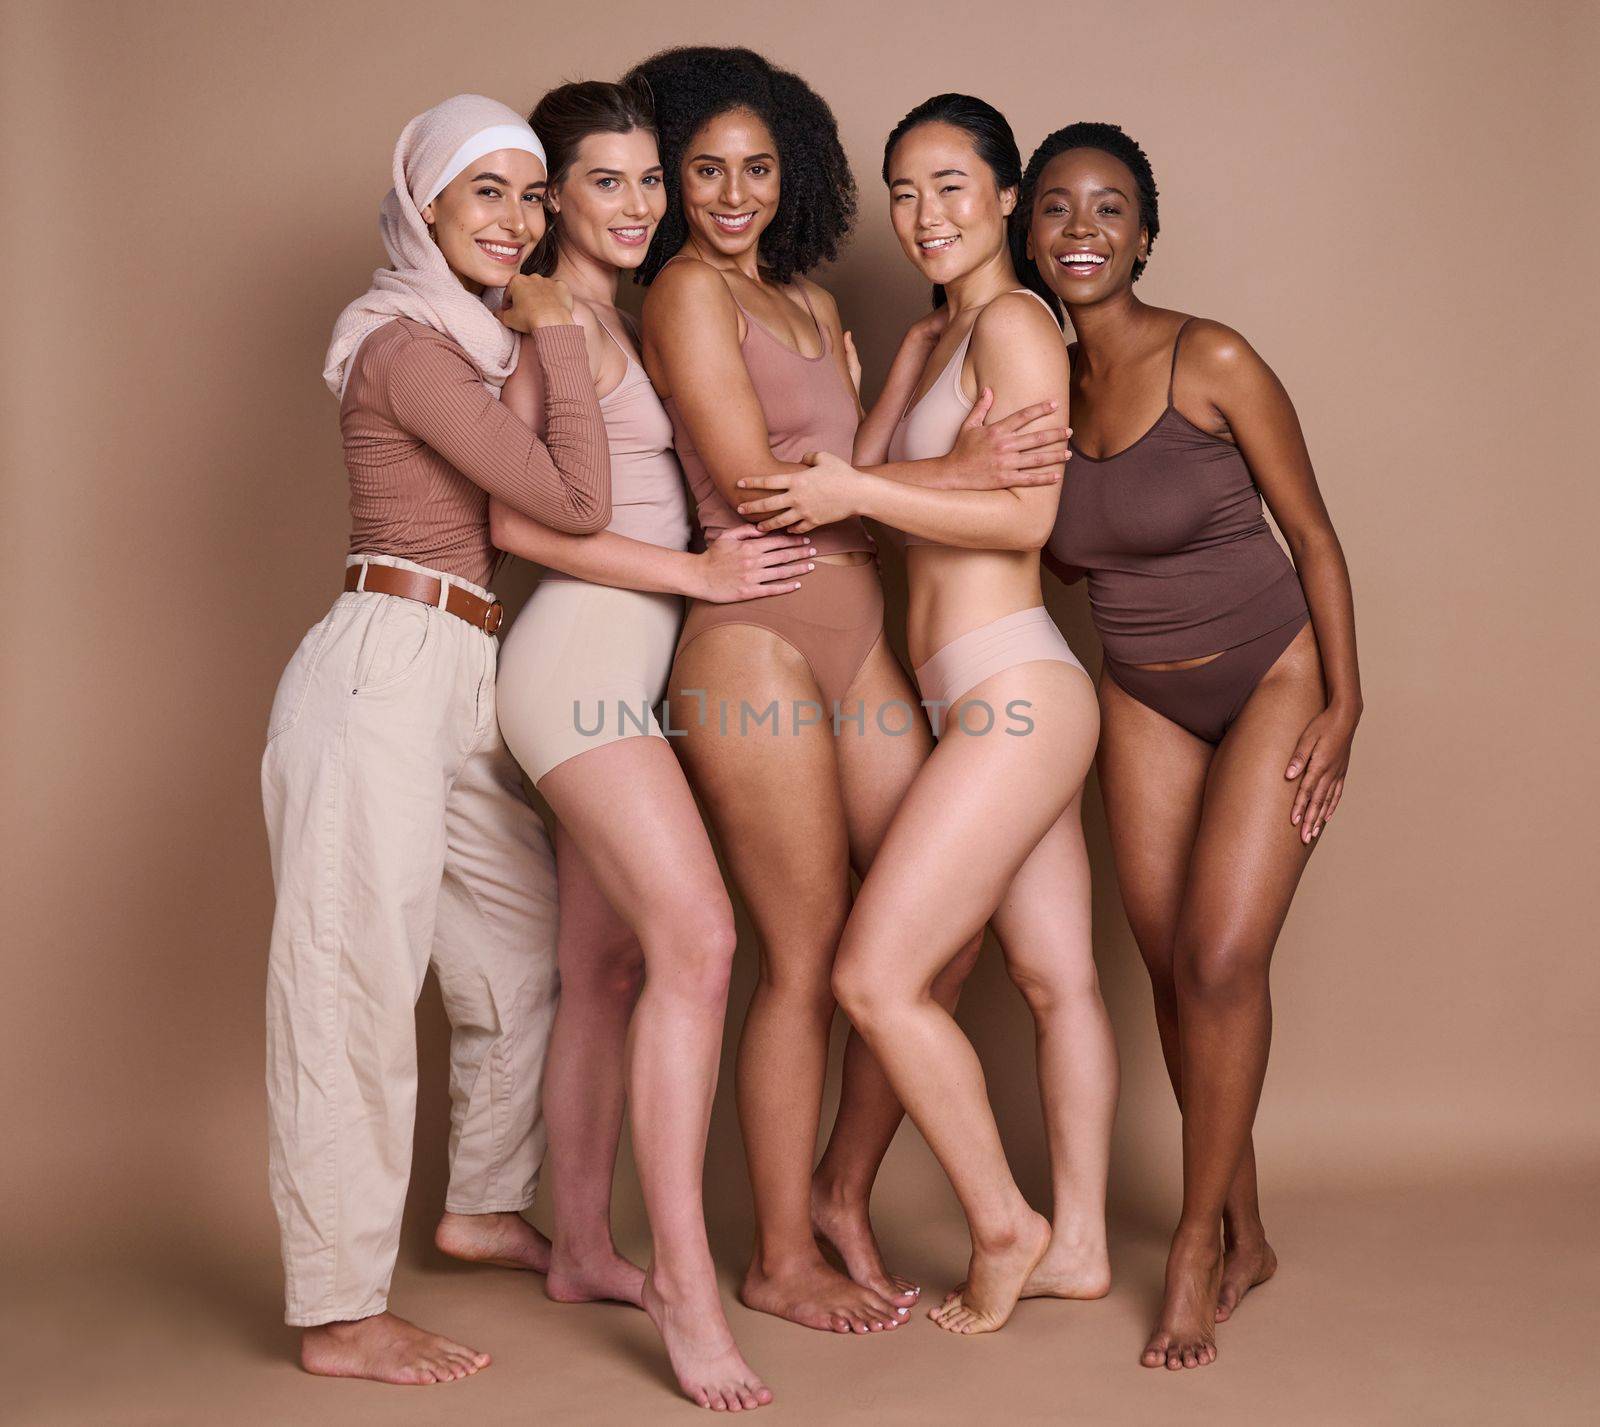 Beauty skincare, diversity and group of women in studio on a brown background. Underwear, makeup cosmetics and portrait of different female models posing for self love, empowerment or body positivity.